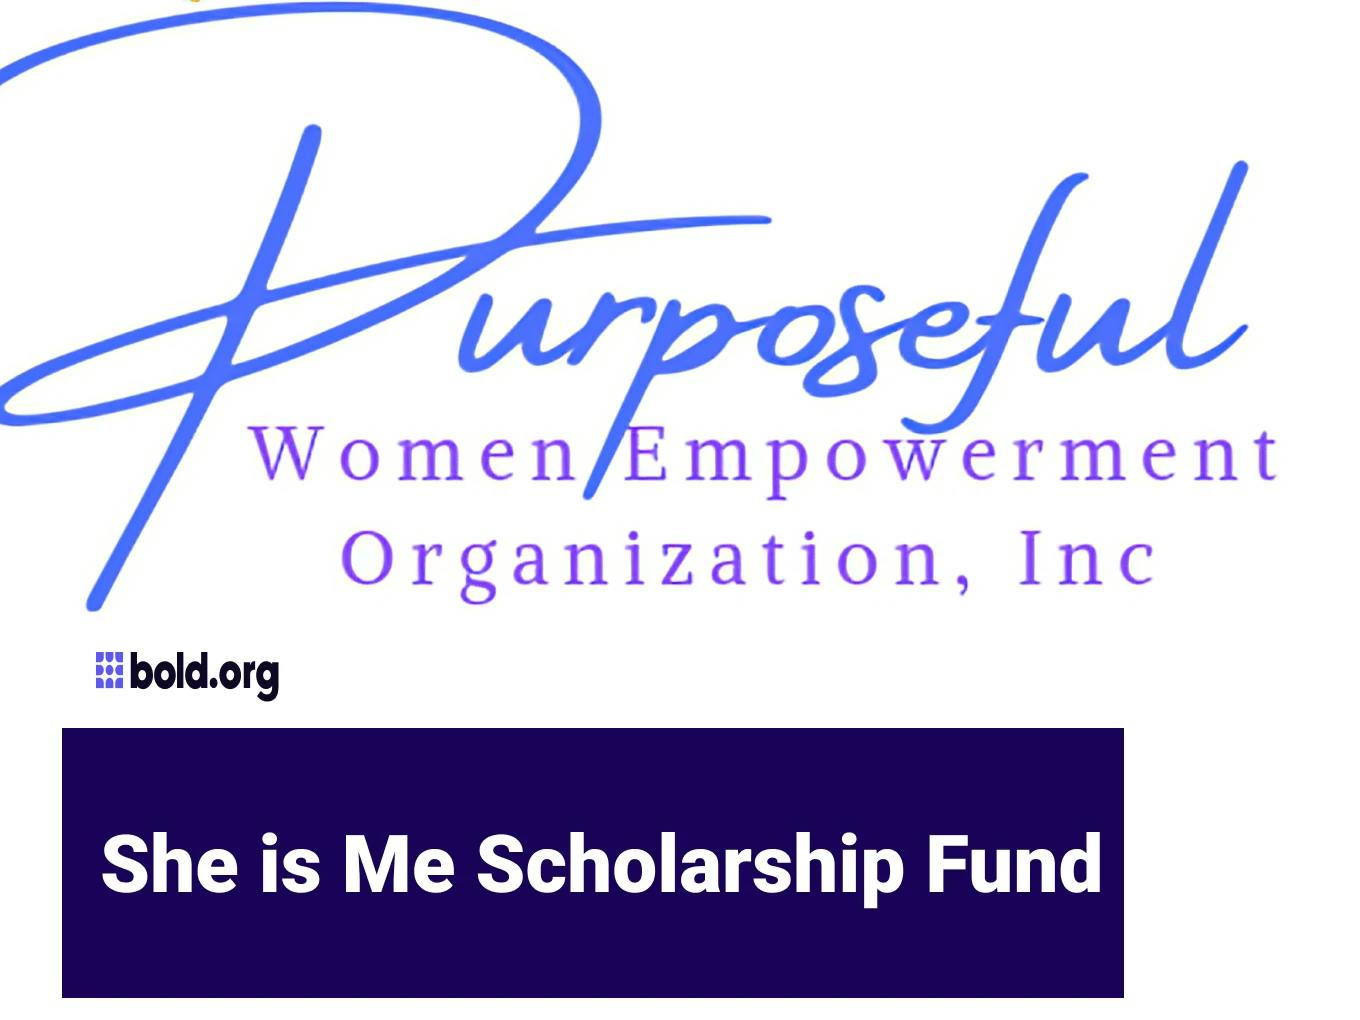 She is Me Scholarship Fund